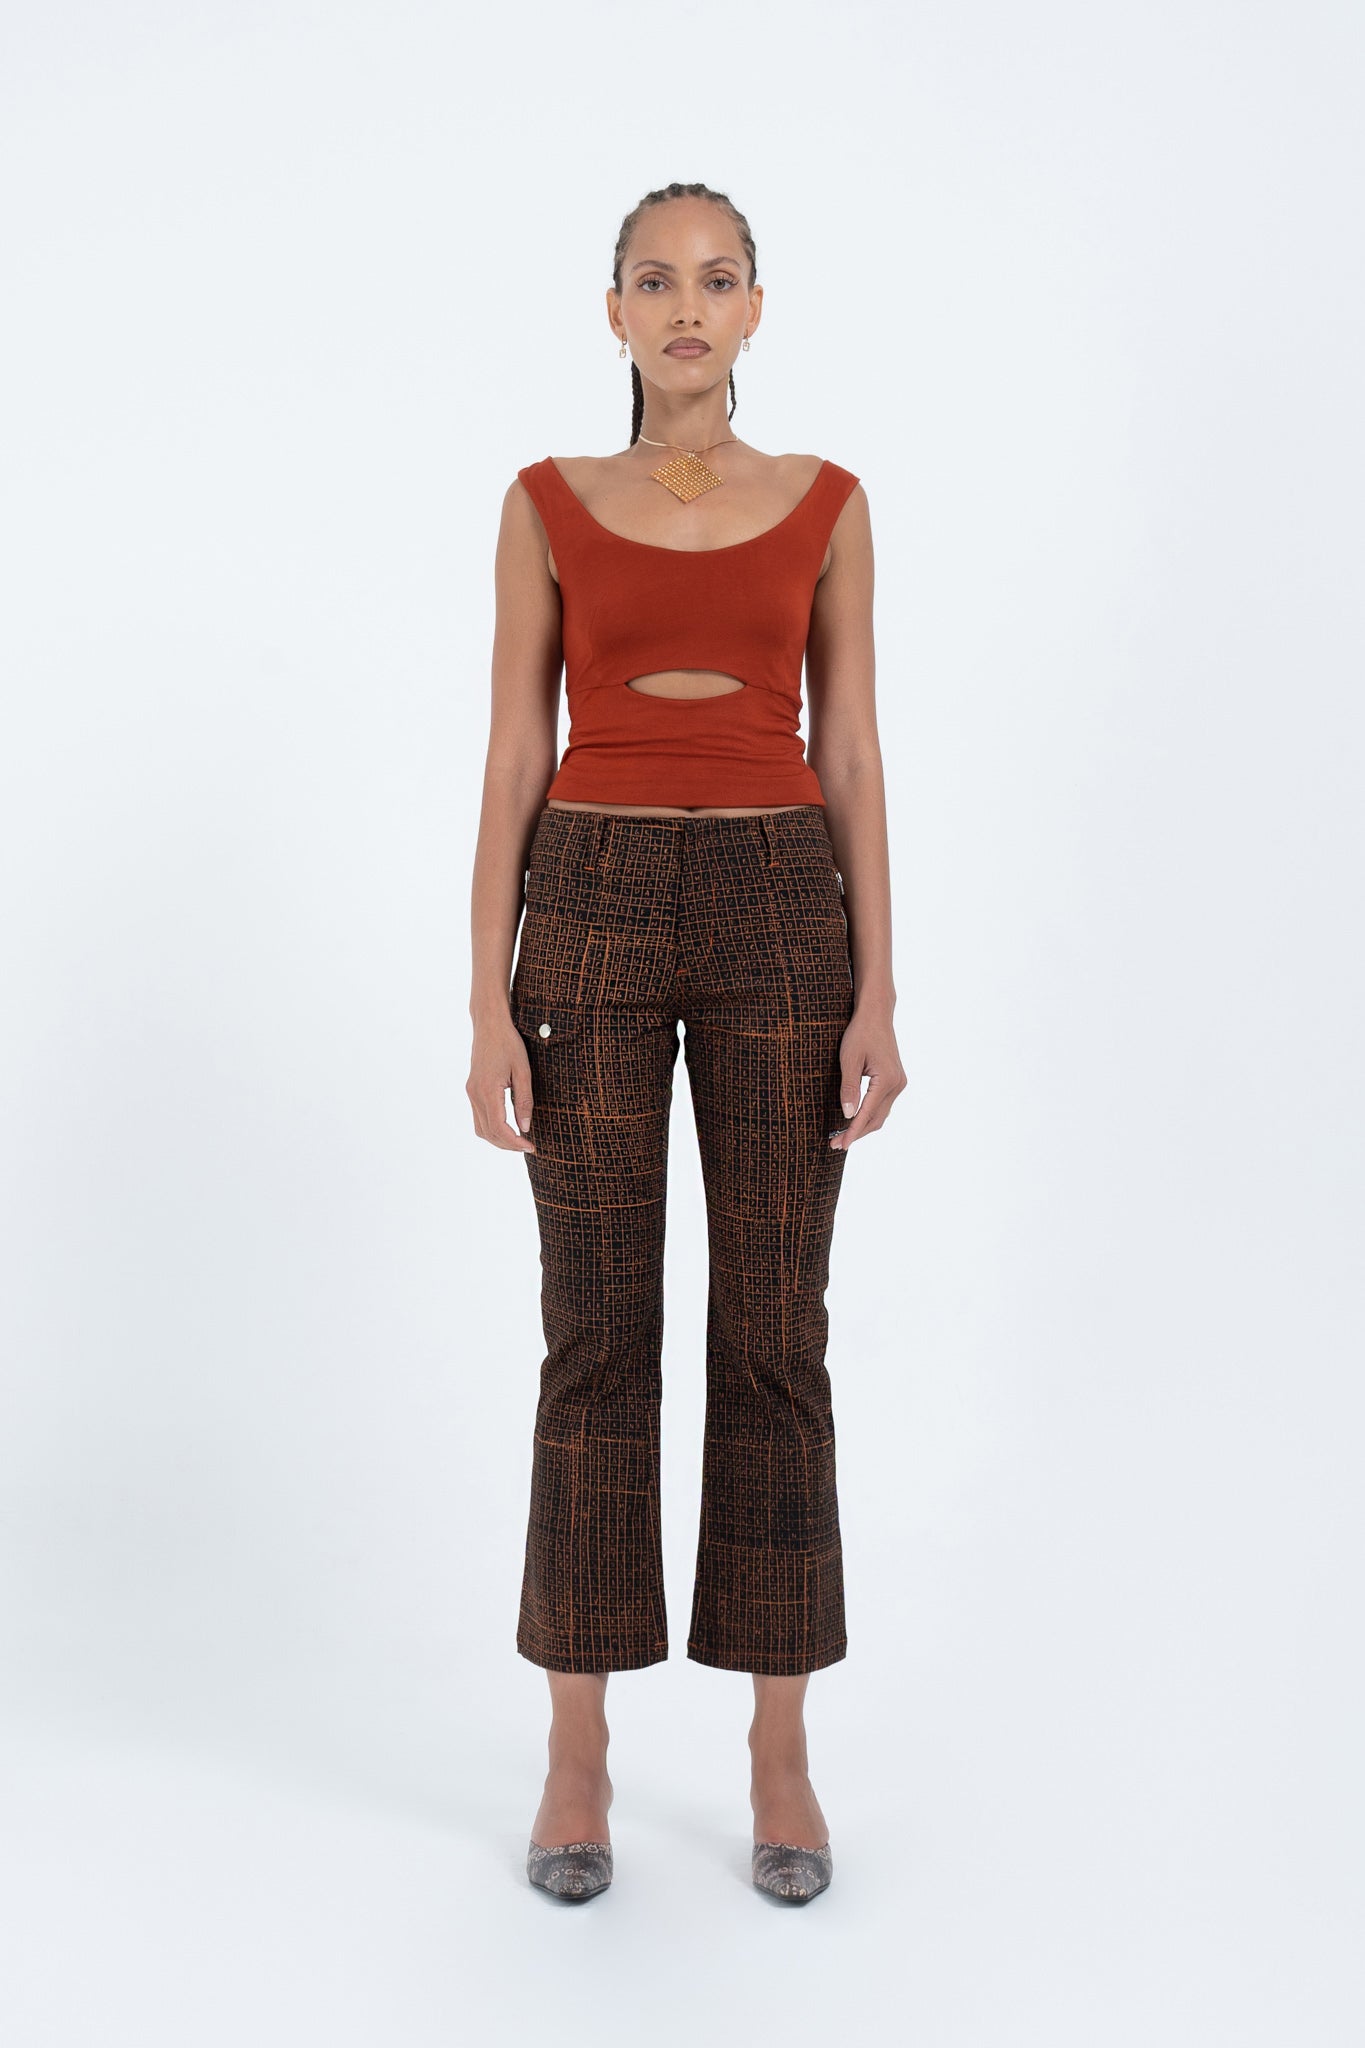 Flared Utility Pant in Find-A-Word